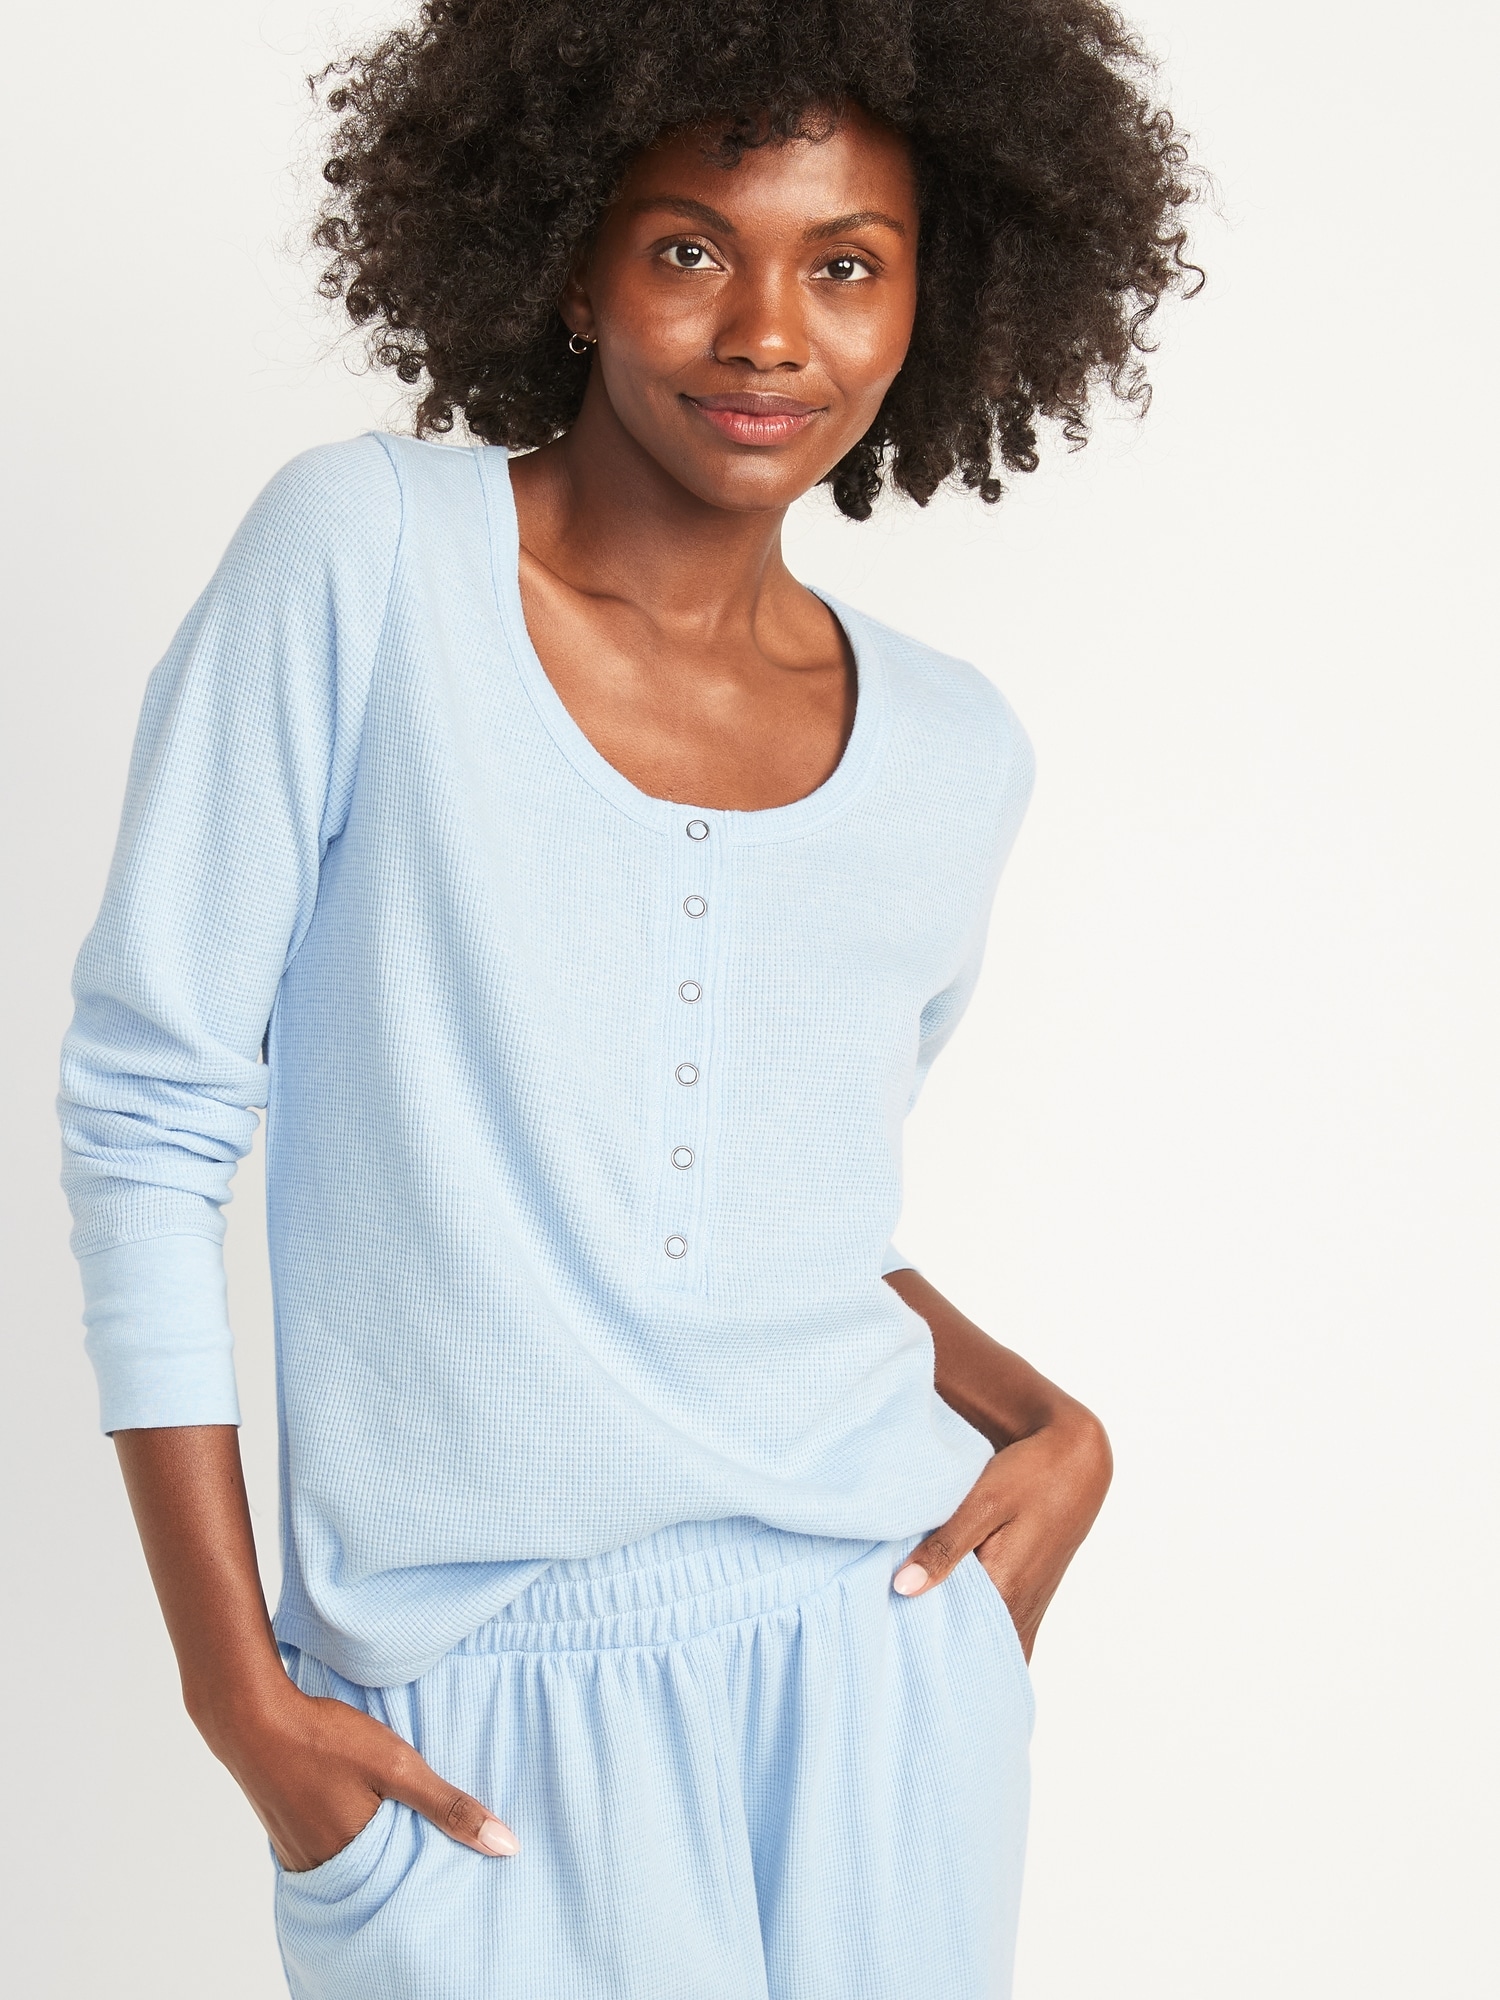 Cozy Thermal-Knit Henley Nightgown for Women